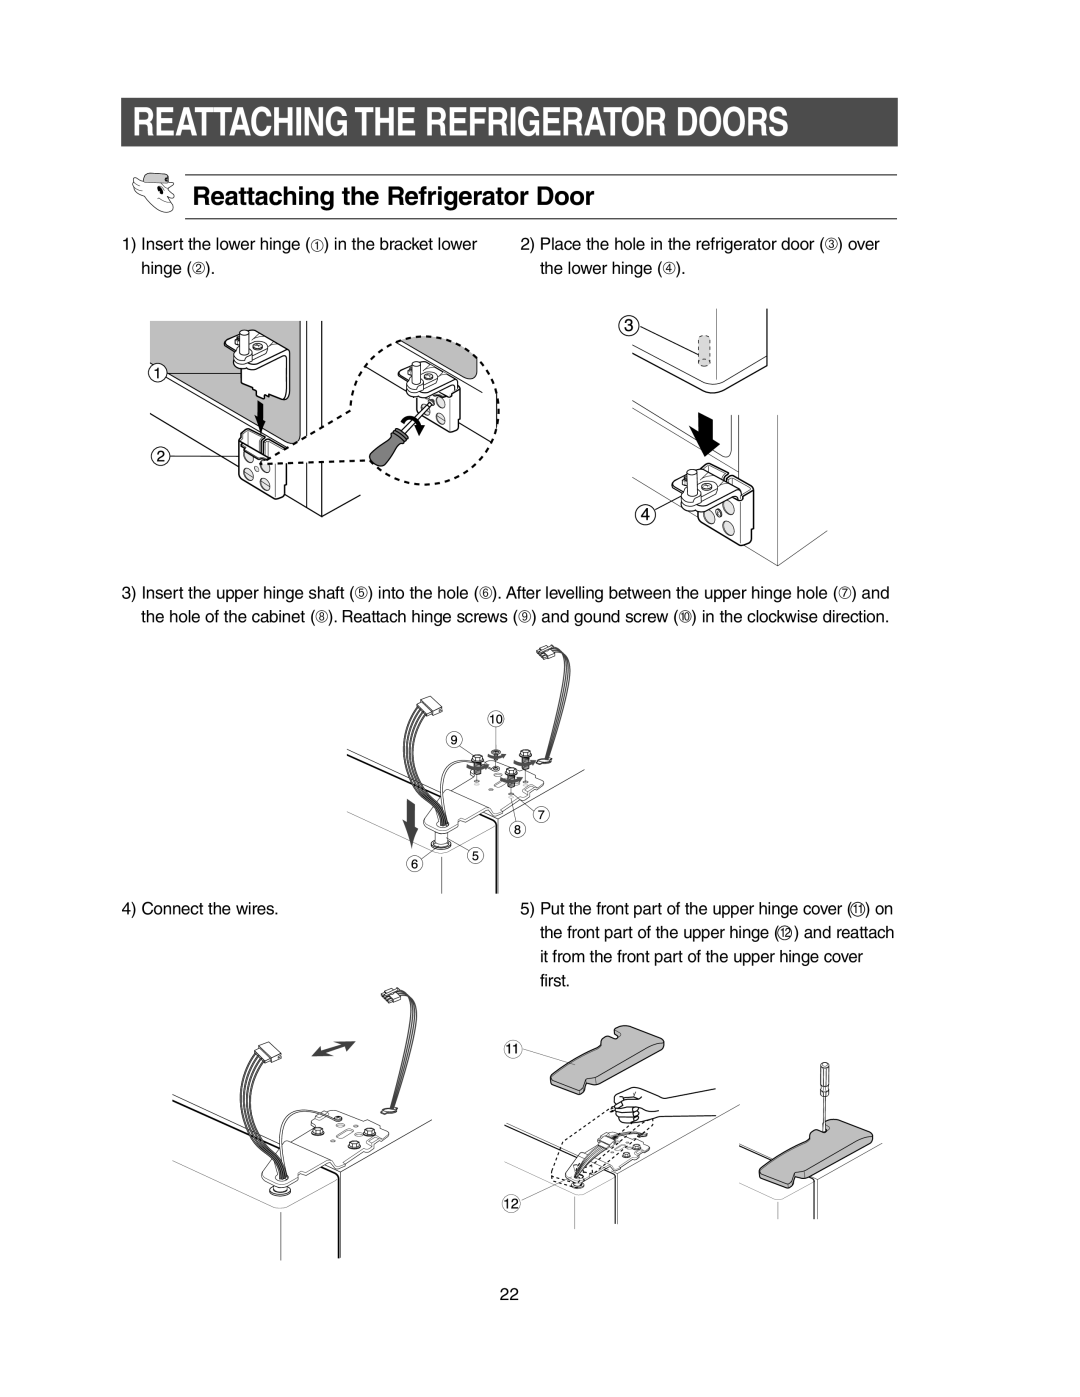 Samsung RS2533, RS2577, RS2555 owner manual Reattaching The Refrigerator Doors, Reattaching the Refrigerator Door 